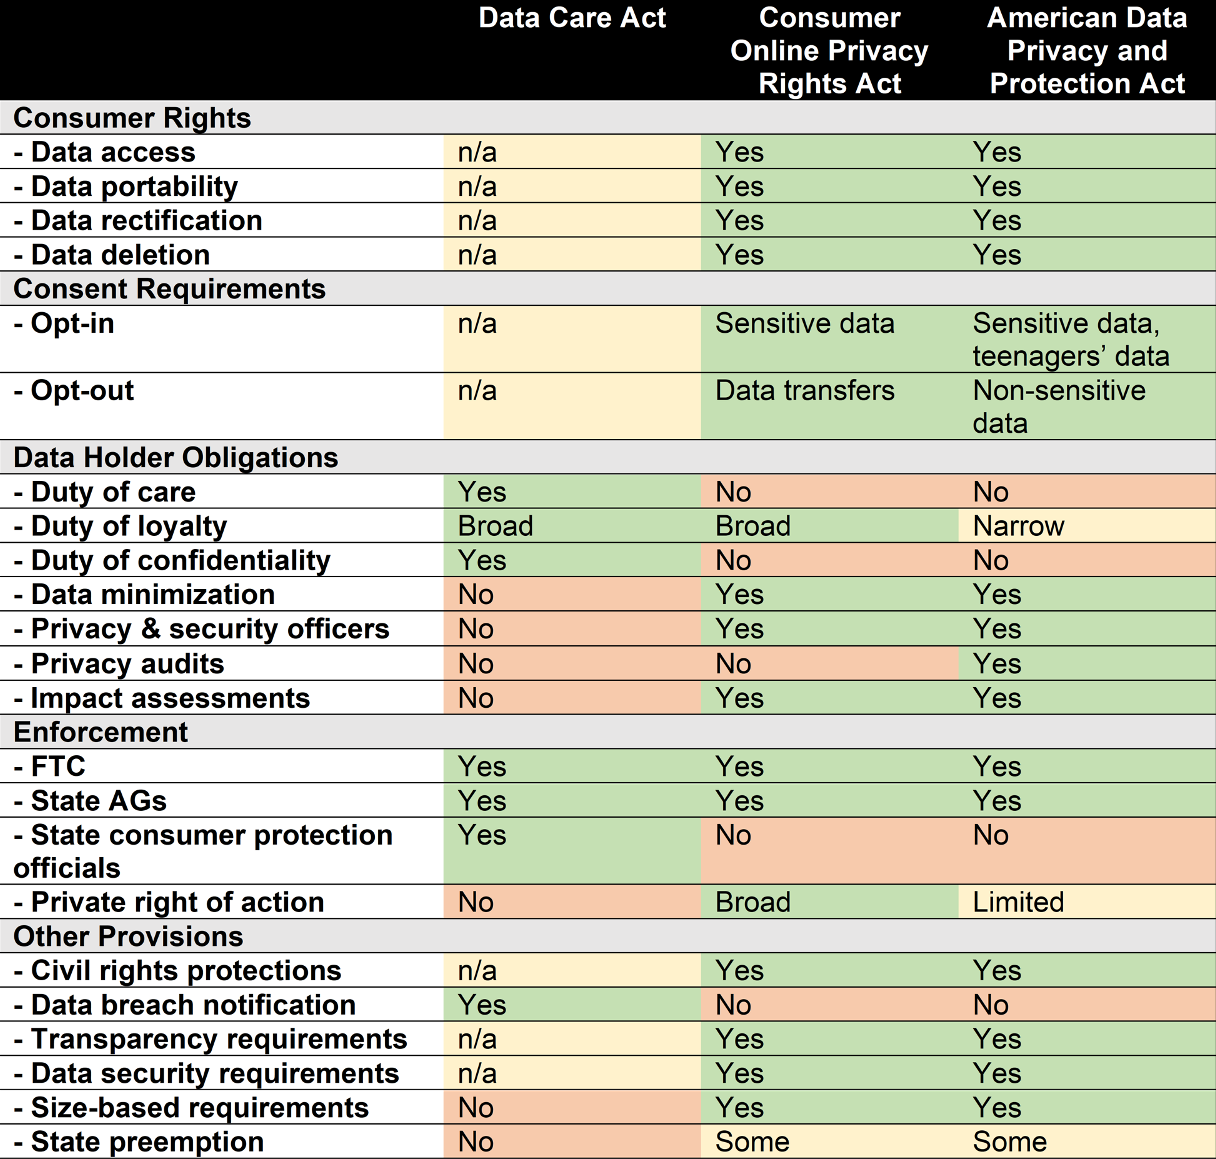 Table 1: Comparison of provisions in three key federal data privacy bills